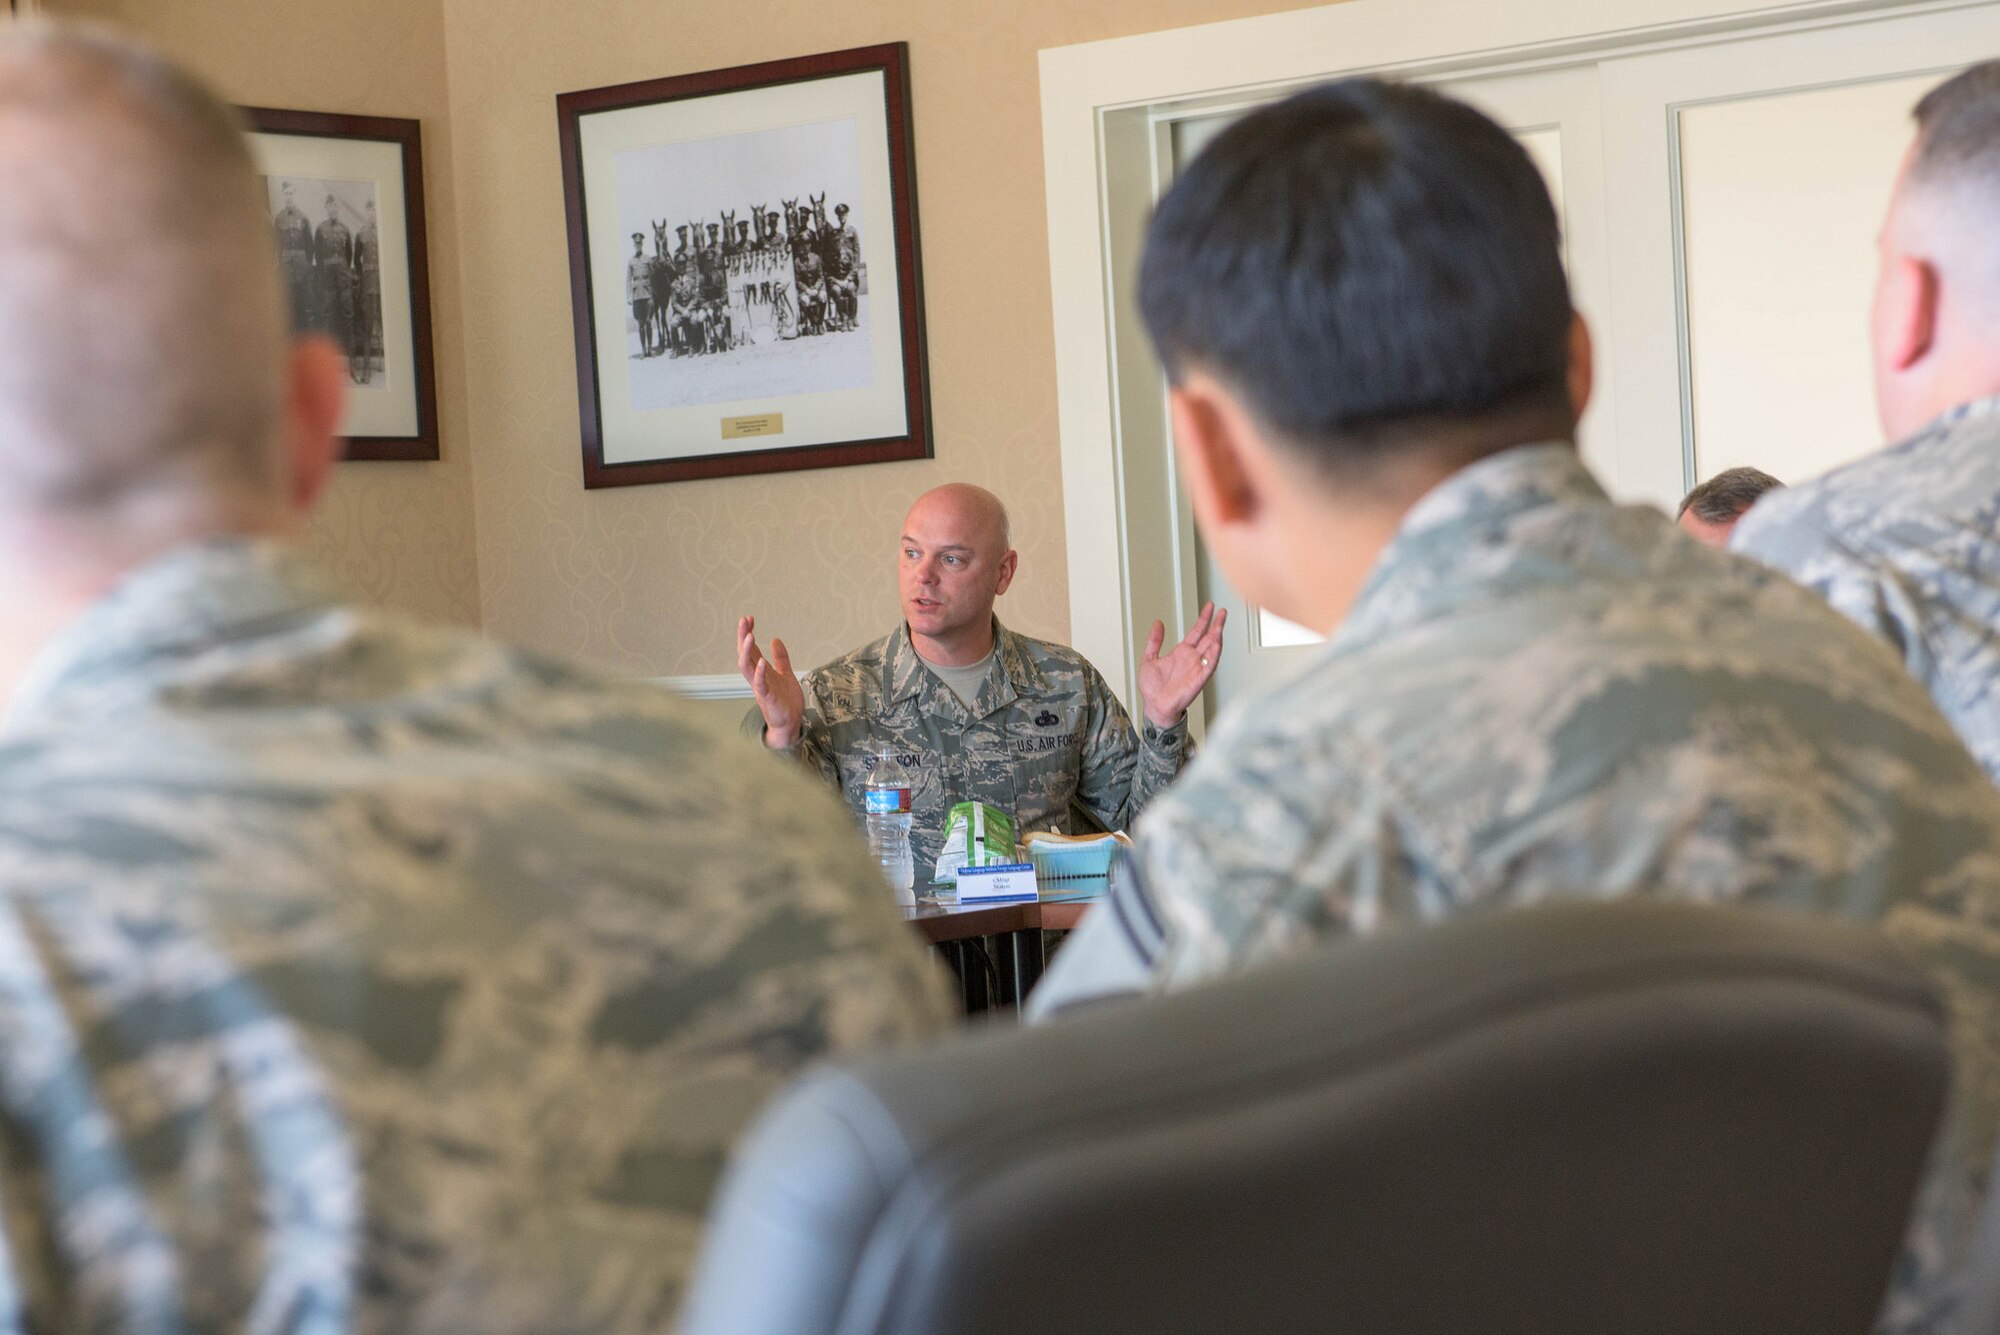 Chief Master Sergeant David Staton, command chief of Air Education and Training Command, visited Airmen at the Defense Language Institute Foreign Language Center as a part of a tour of installations that AETC oversees. (U.S. Army photo by Amber Whittington) 